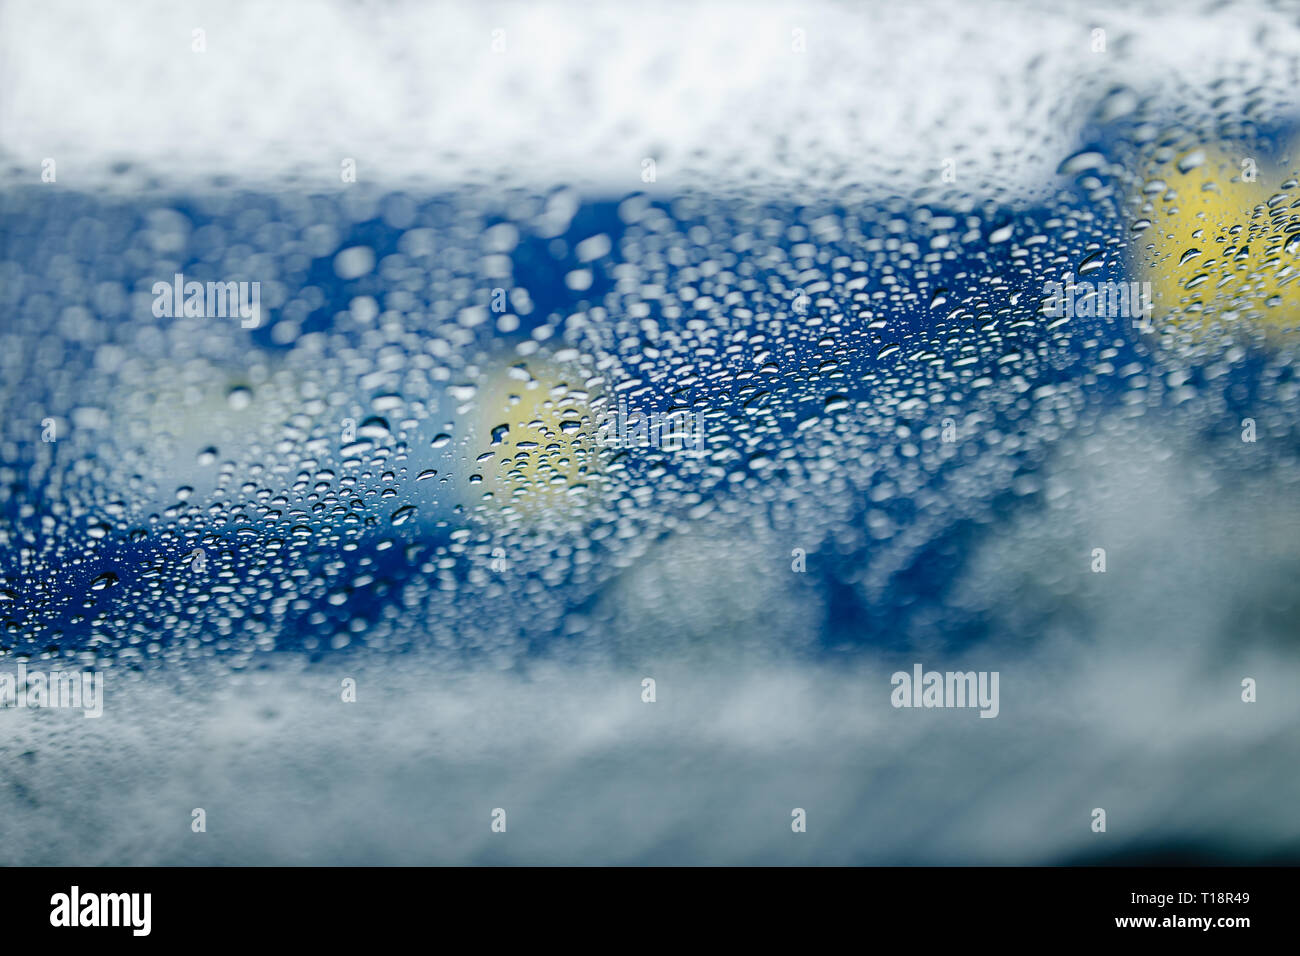 Traffic abstract in rain. Traffic seen from inside a car. Rain drops on windshield and car tail lights in bokeh Stock Photo